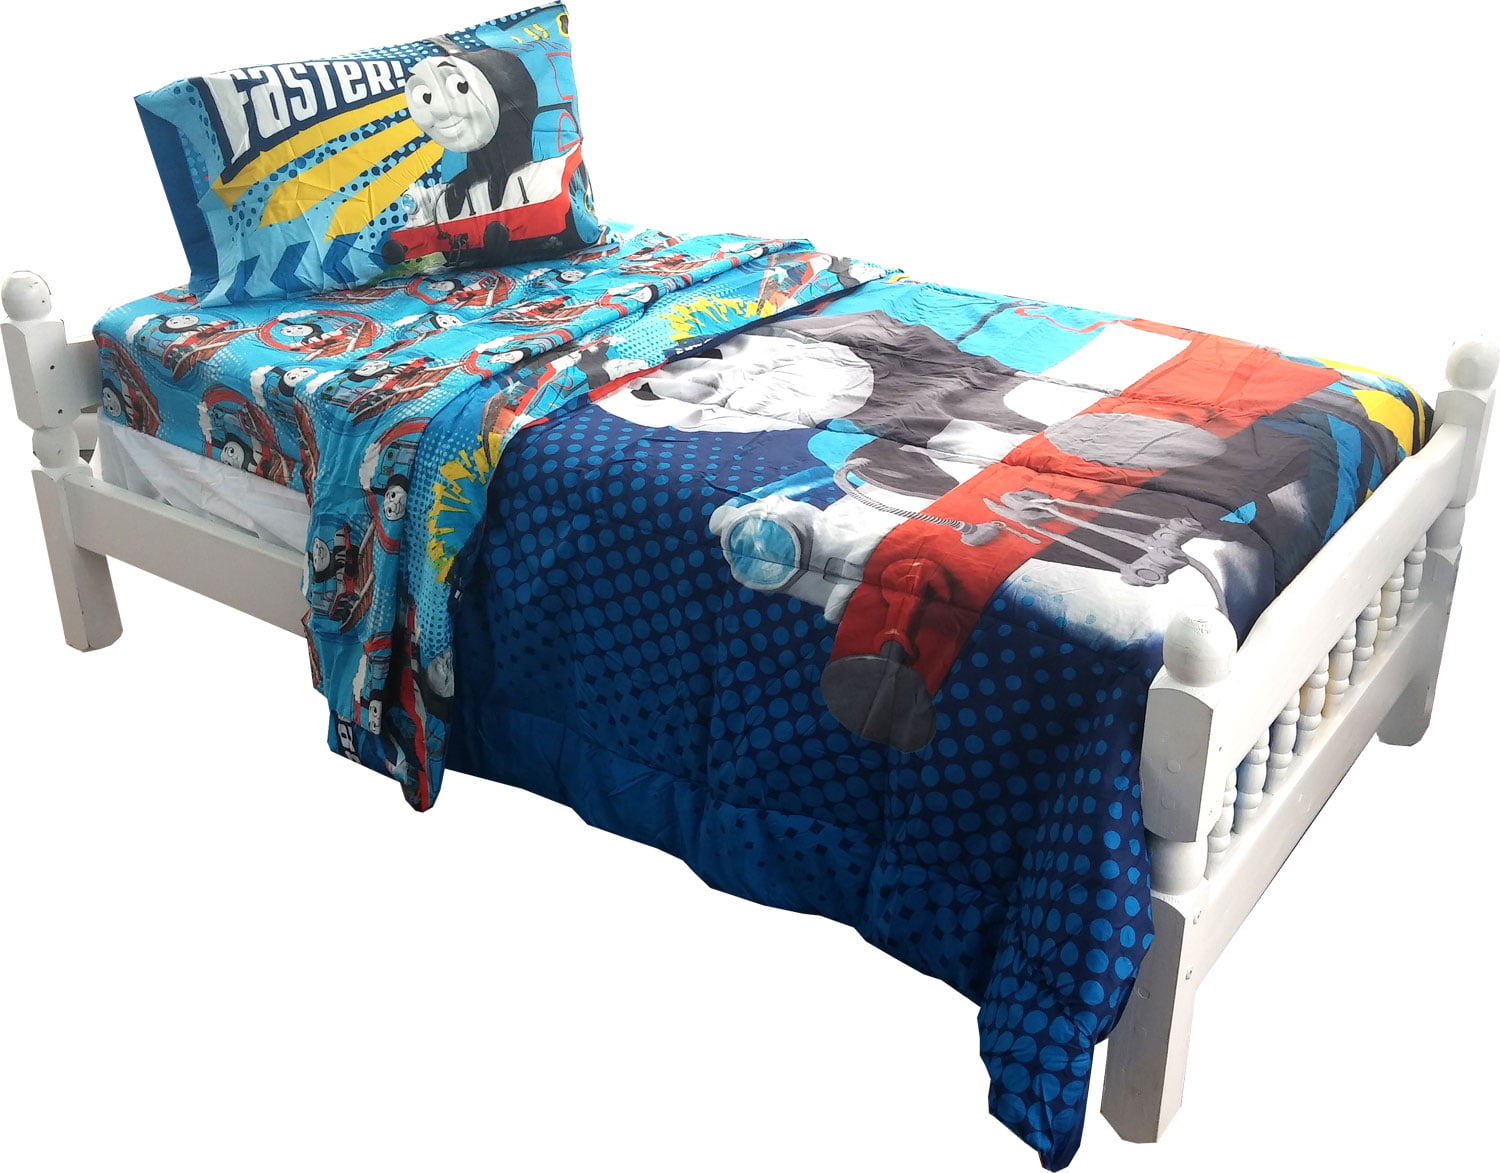 THOMAS THE TANK ENGINE EXPRESS SINGLE BED BEDDING QUILT /DUVET COVER SET BLUE 